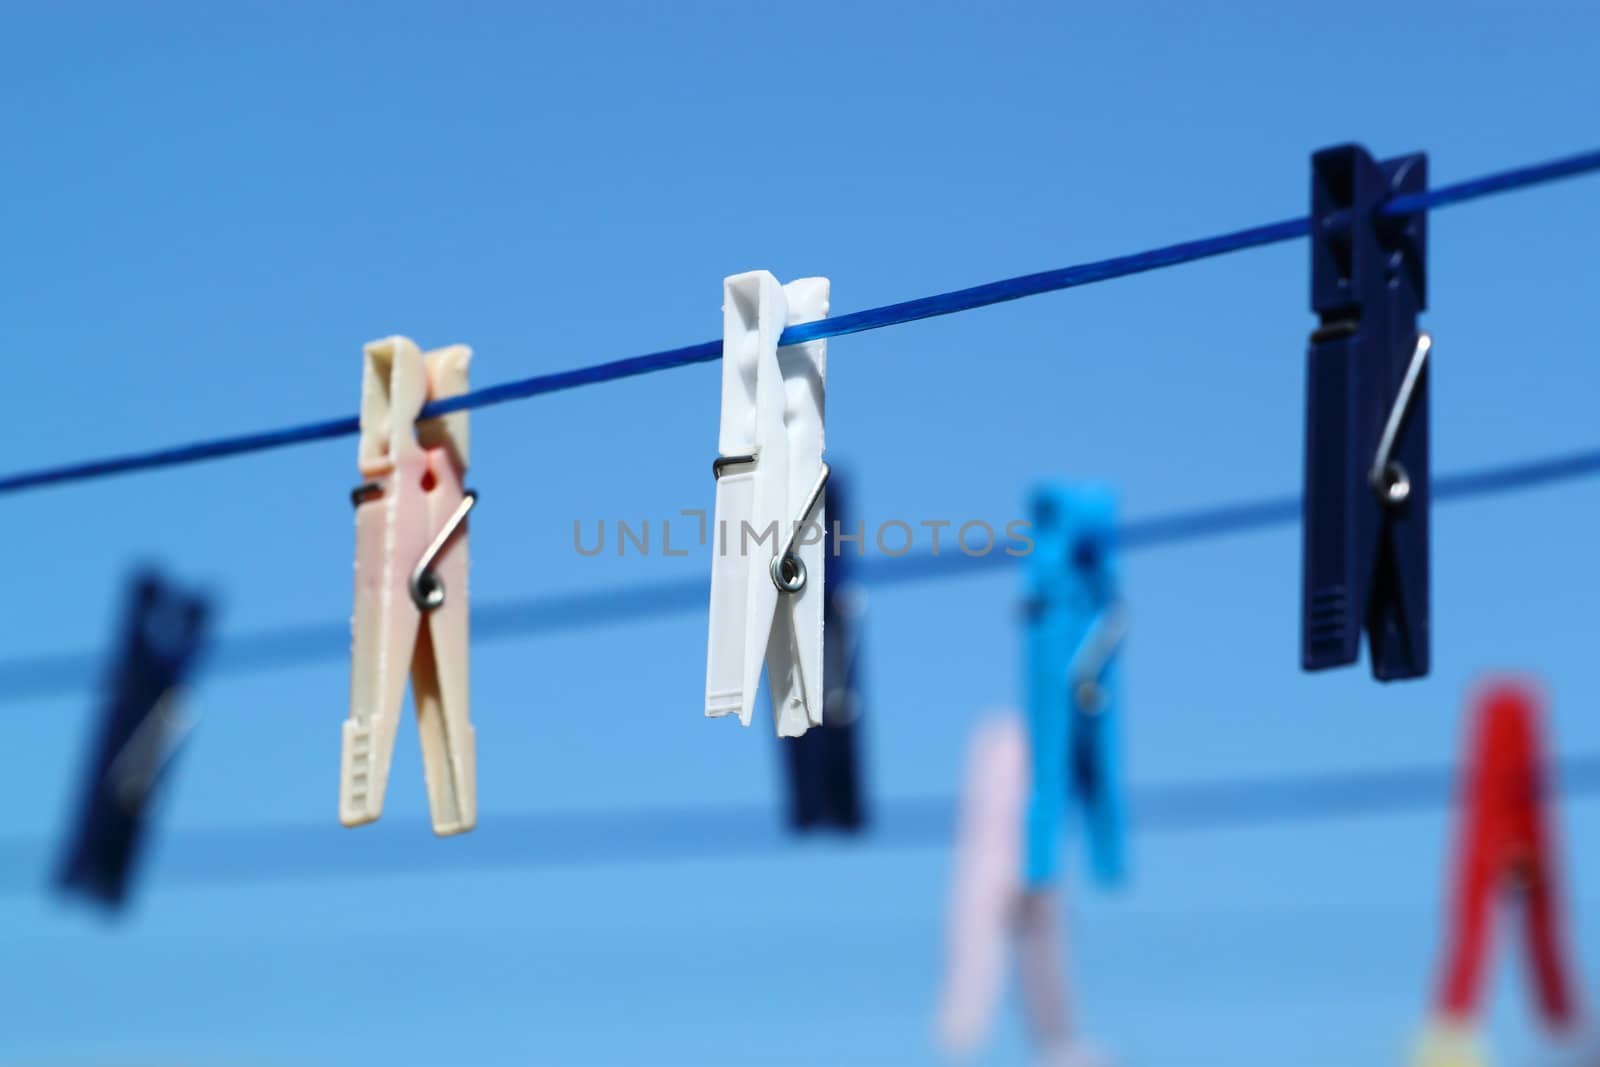 cloth pegs with a under the blue sky  by artush